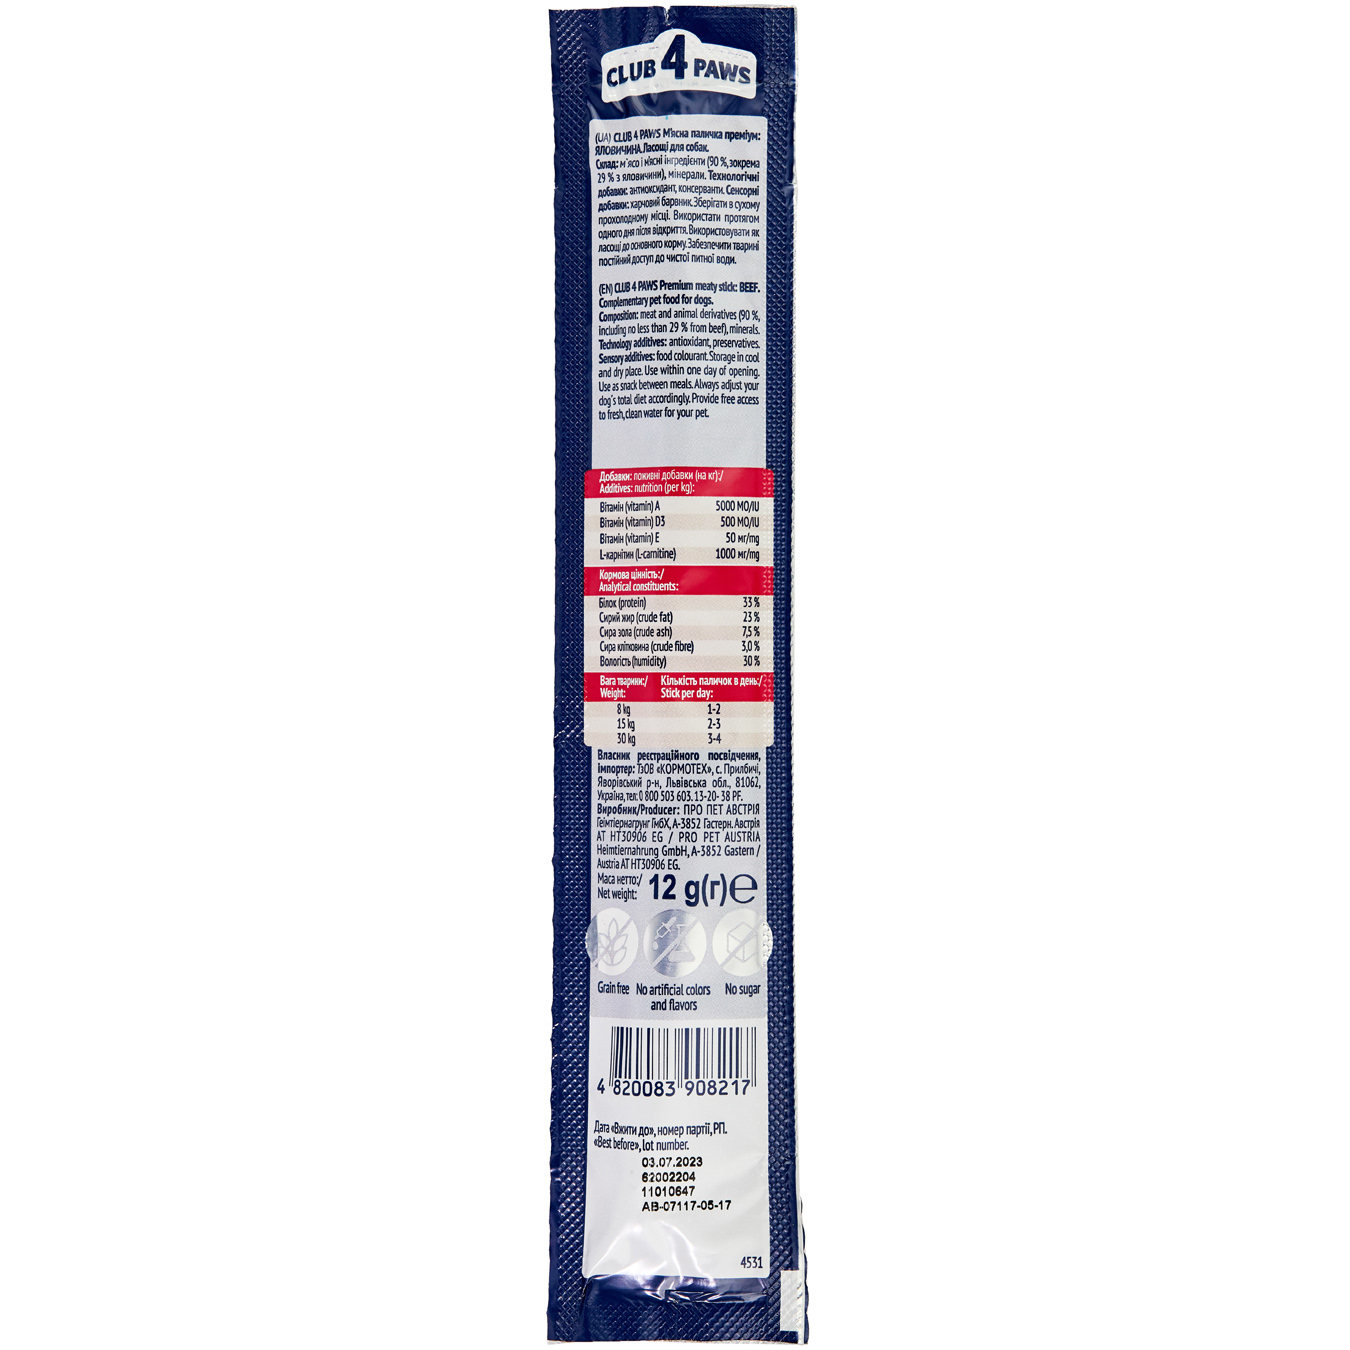 Delicacies Club 4 paws Premium Meat Stick beef for dogs12g 2